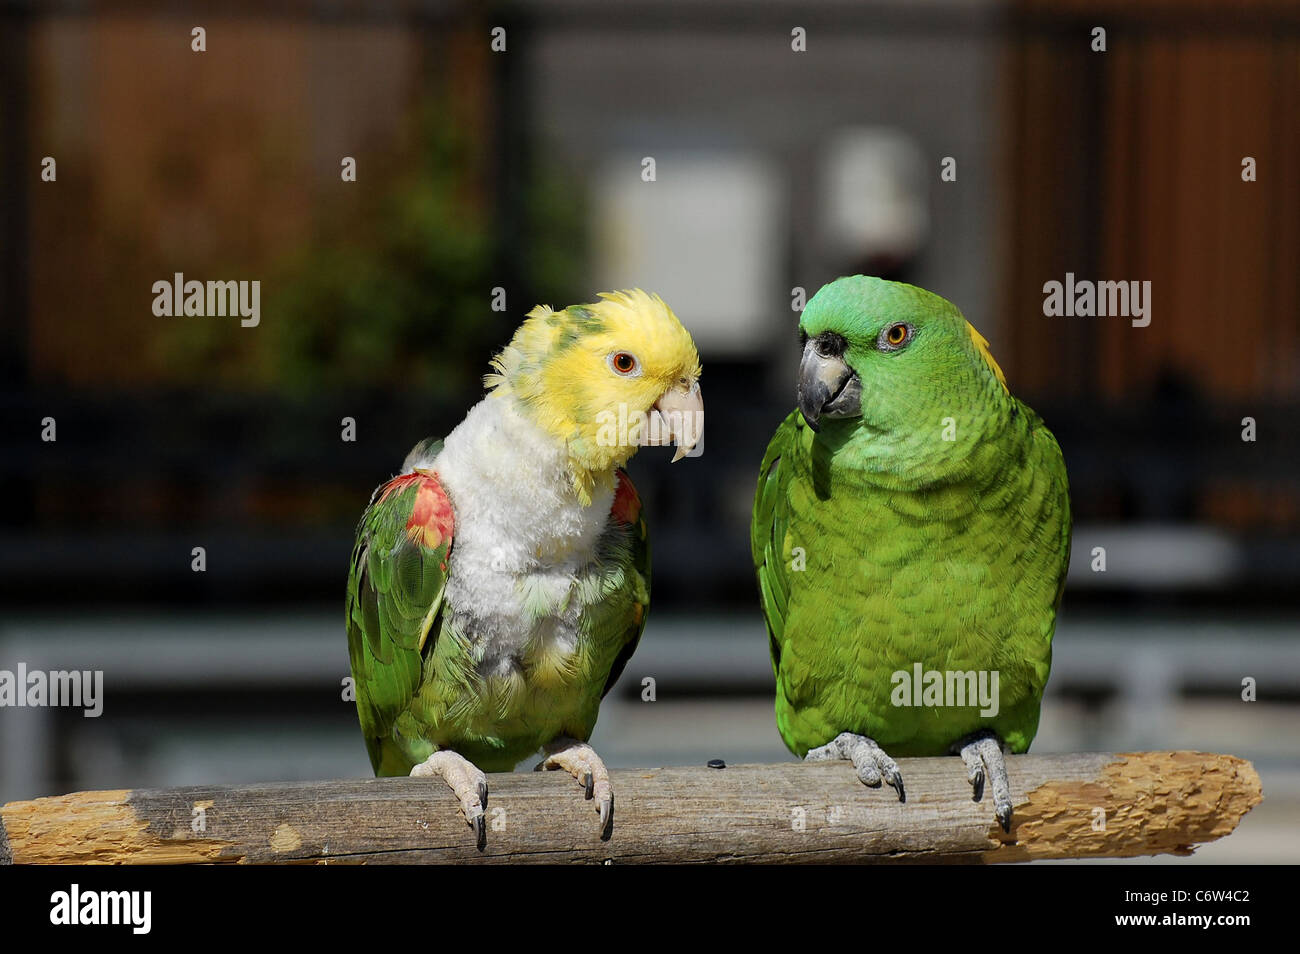 Male and female green parrots with the result of too much grooming visible on the leftmost one. Stock Photo